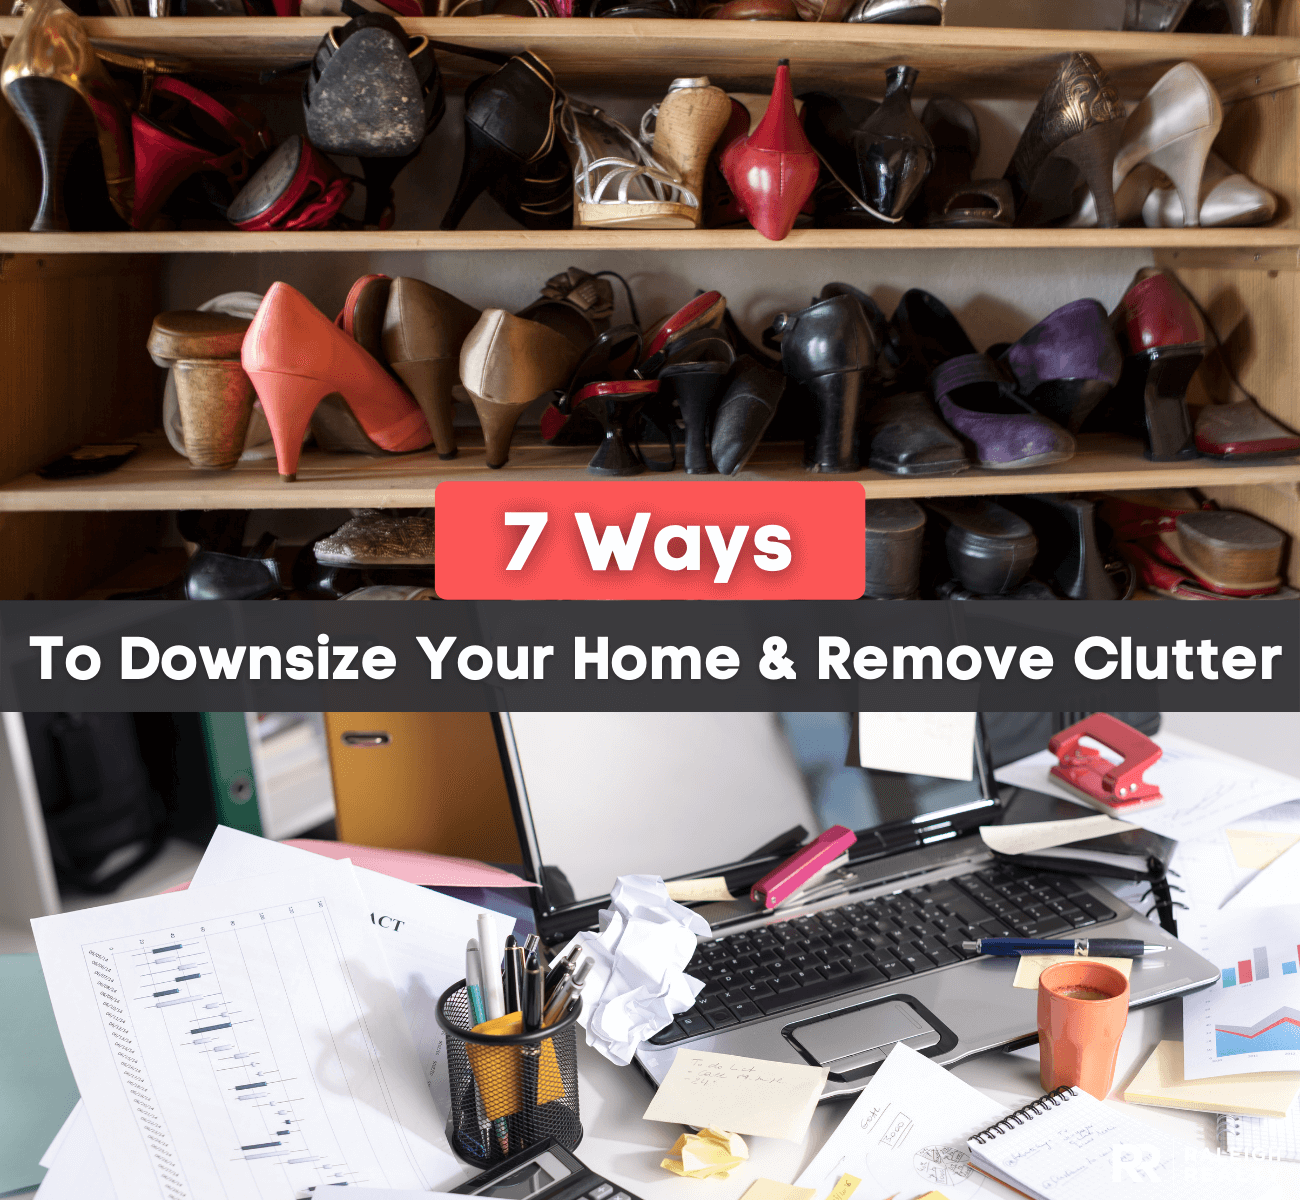 7 Ways to Downsize your home and remove clutter in the house